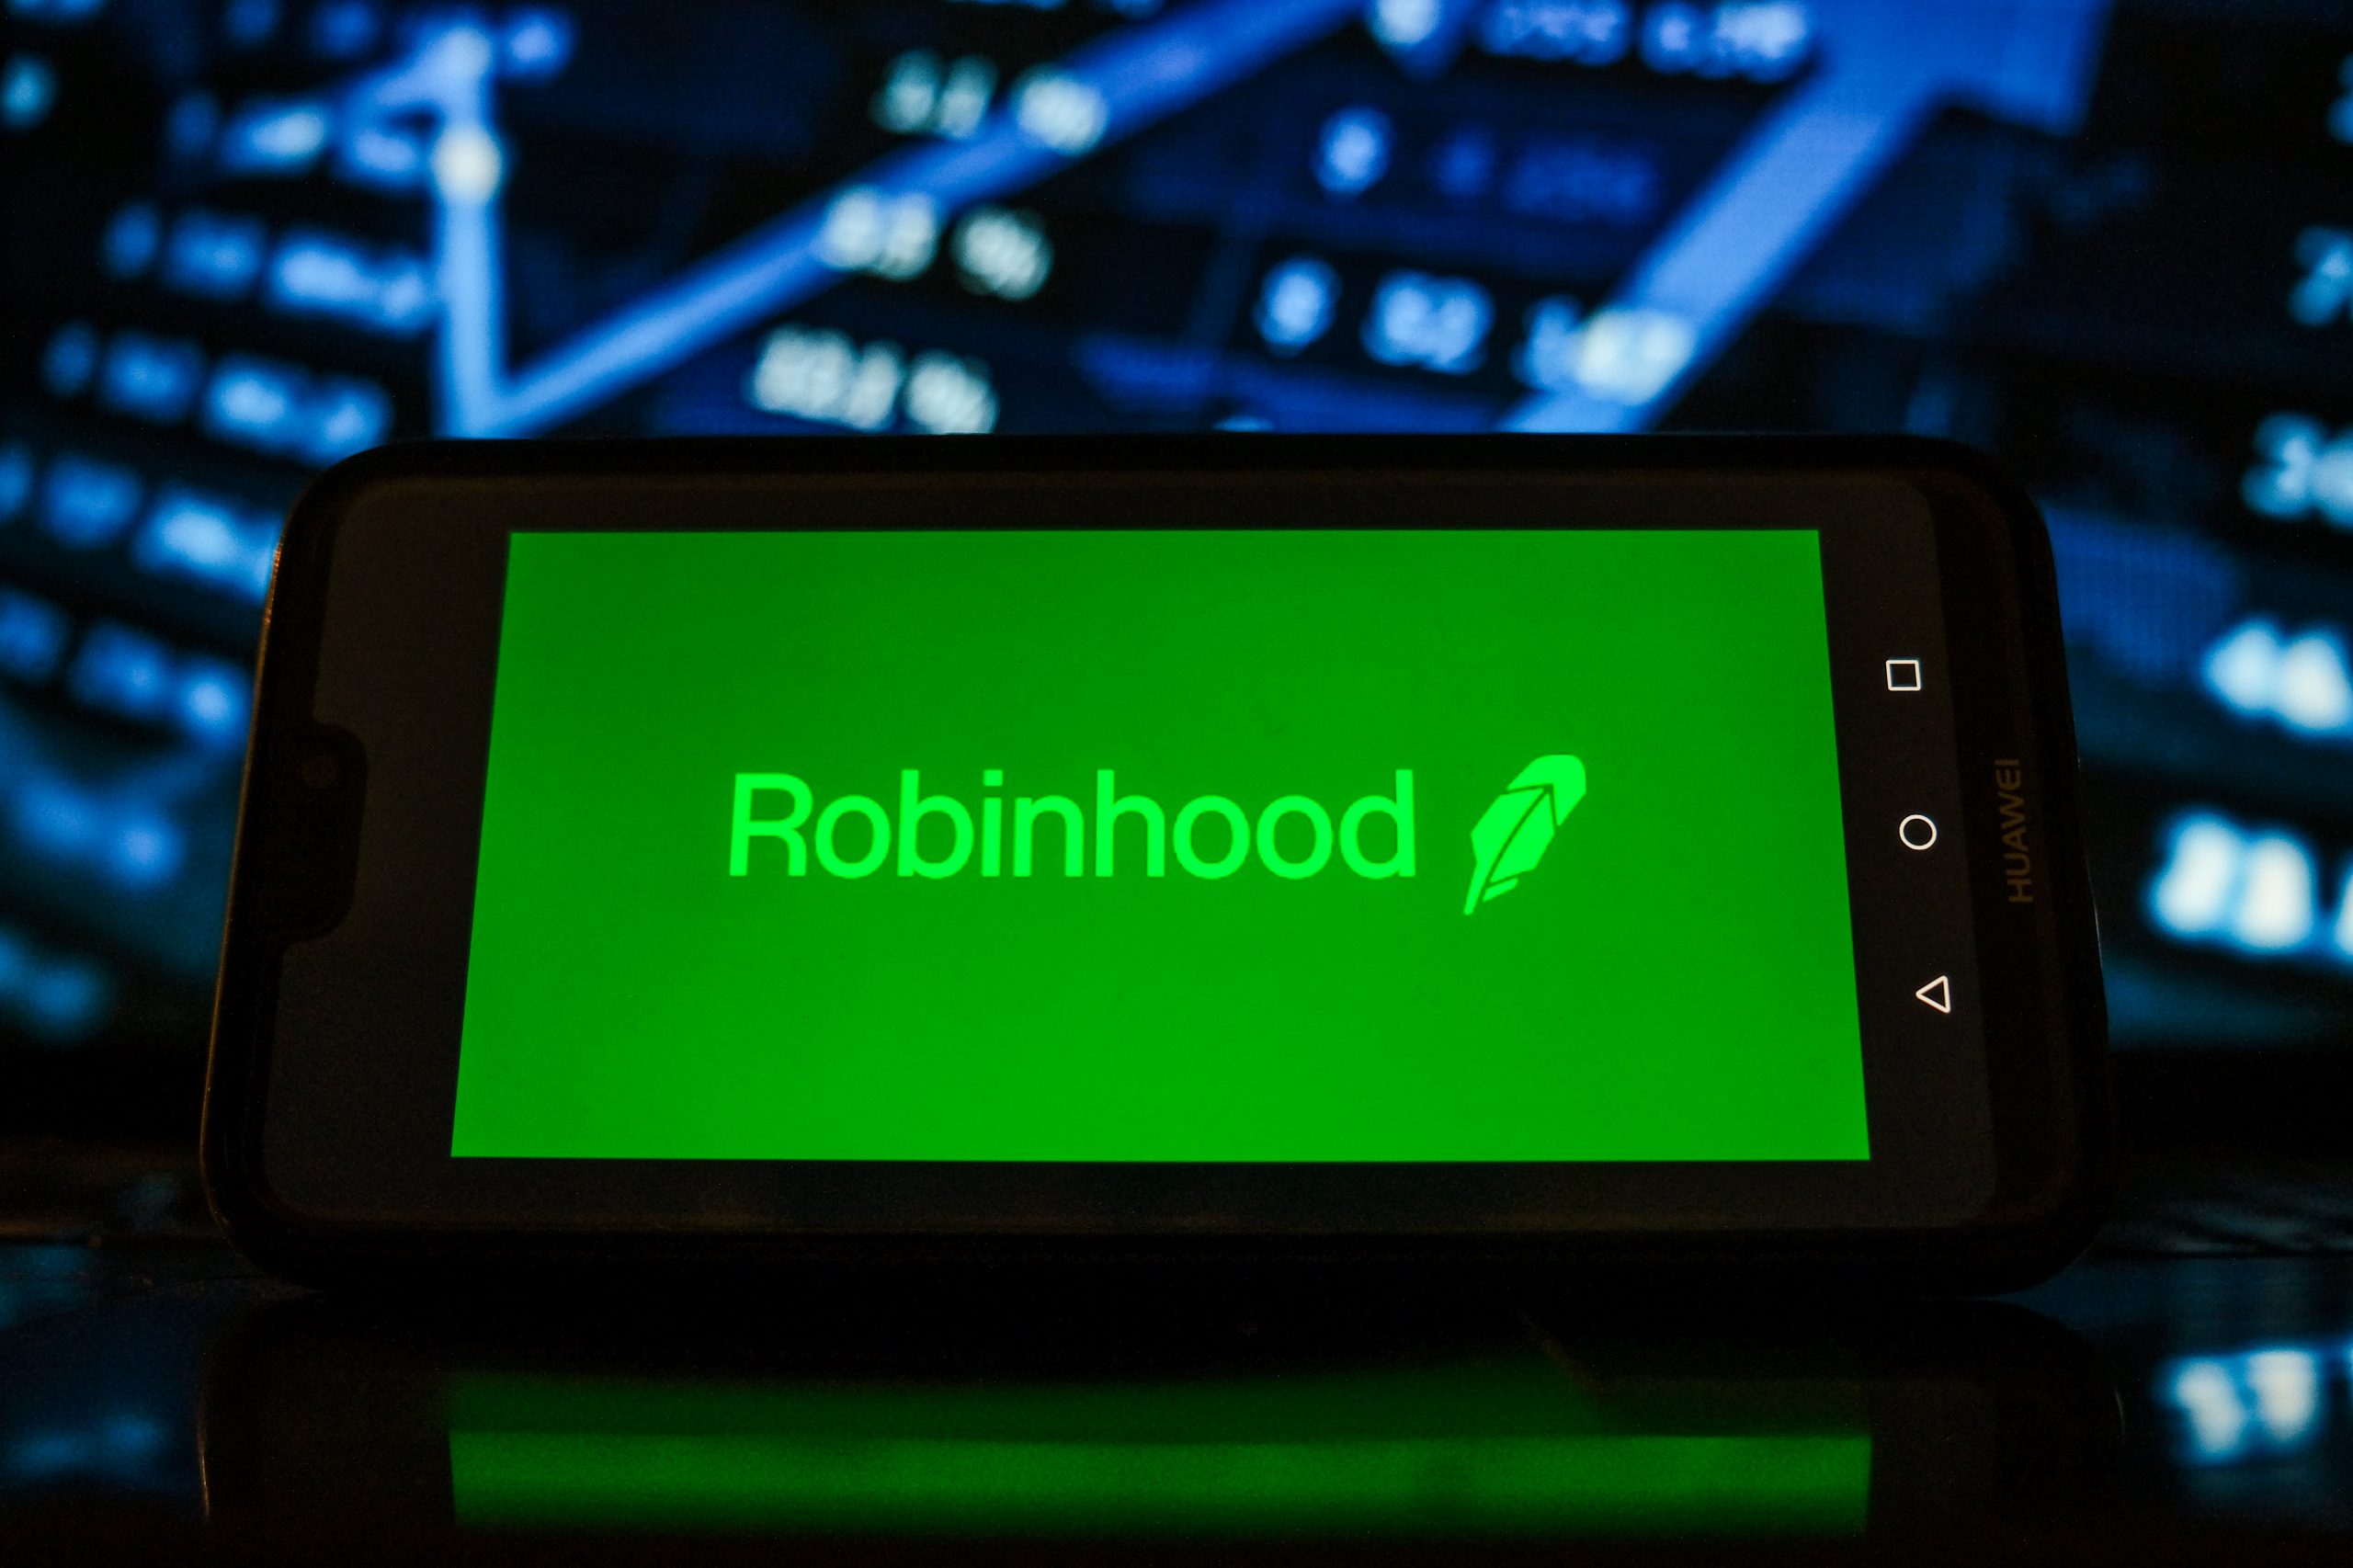 Robinhood continues to be on monitor for a sizzling IPO regardless of the GameStop uproar